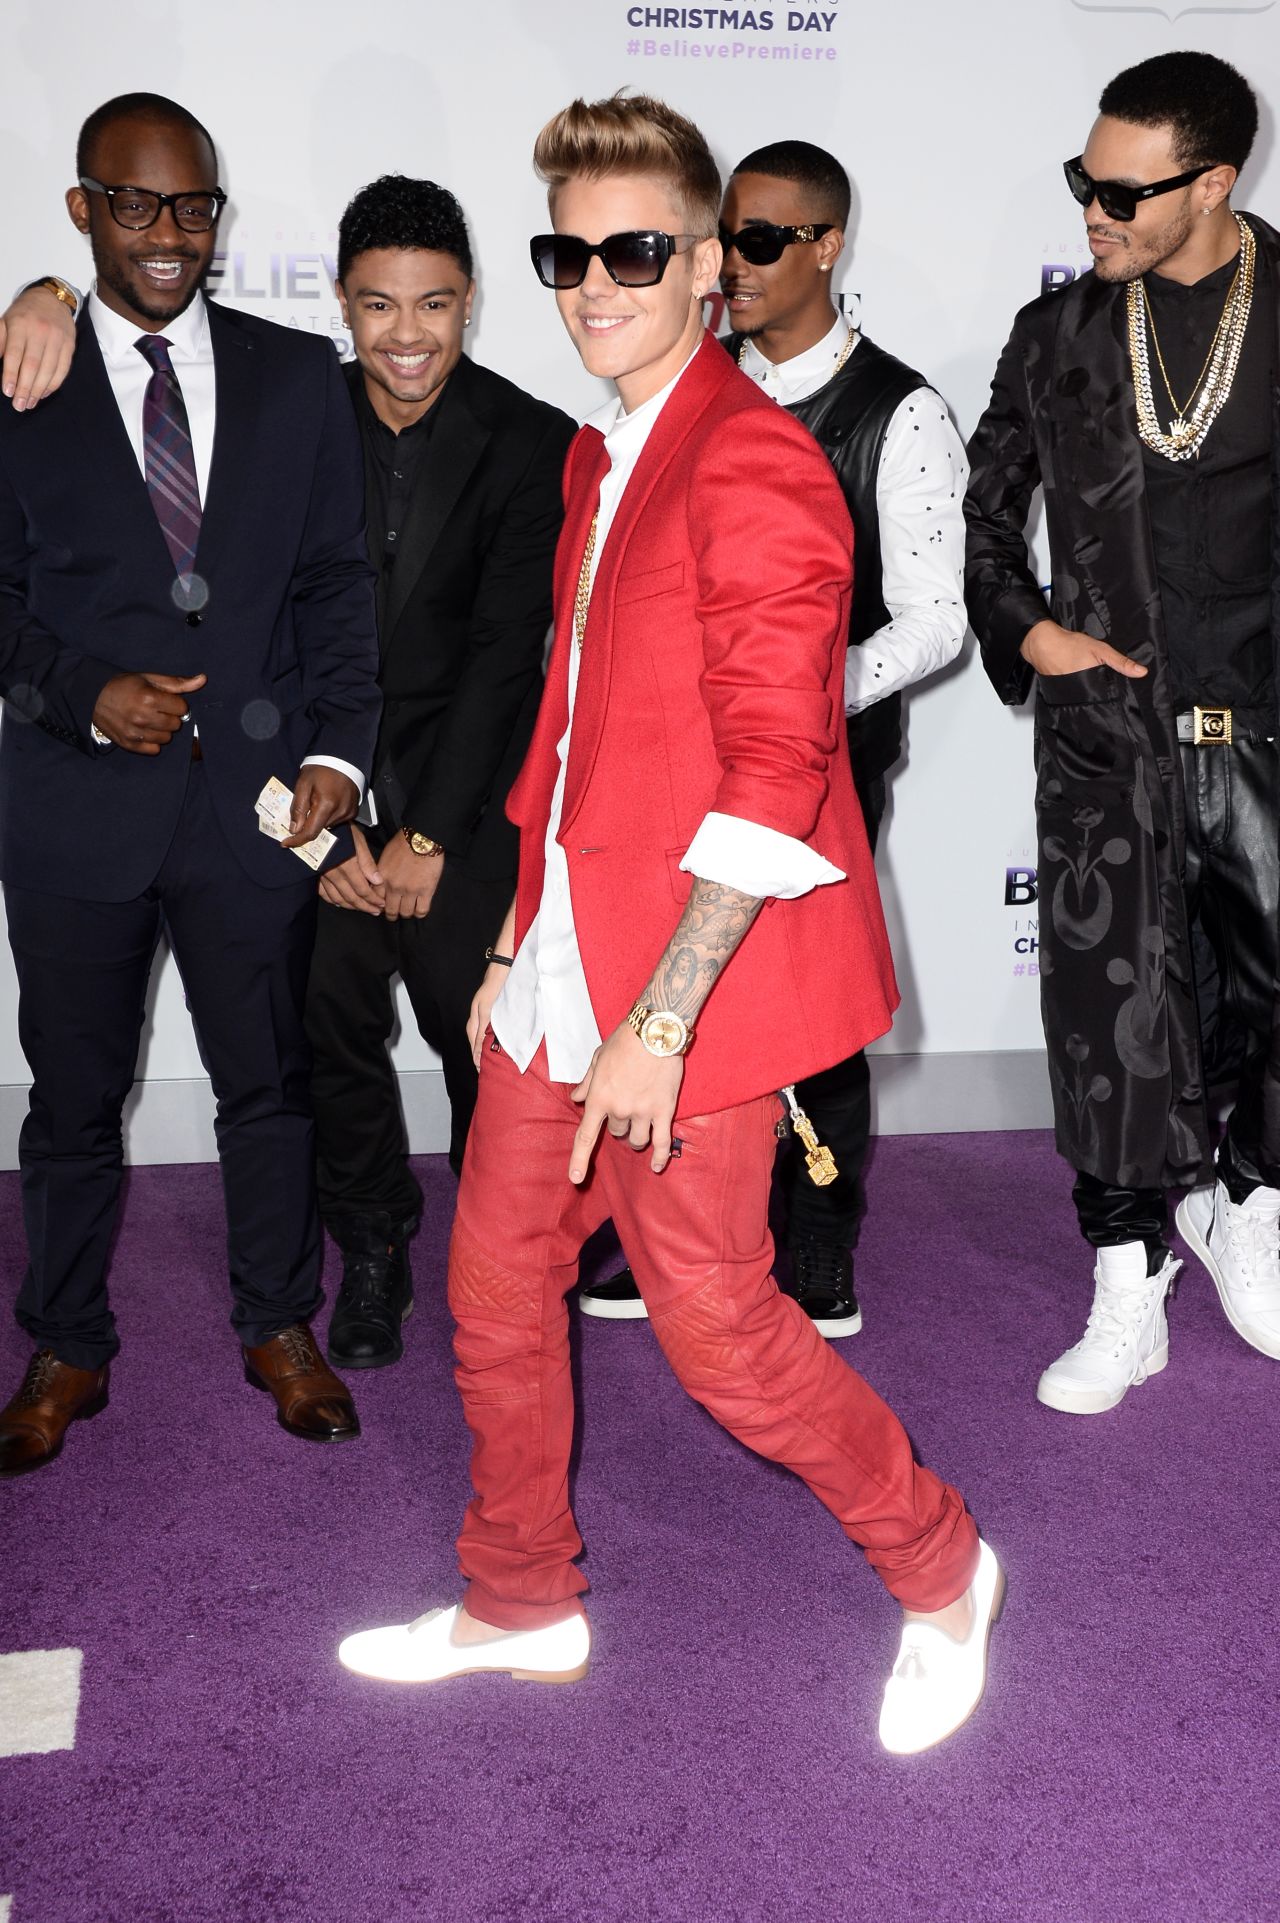 Justin Bieber has a glow as he arrives at the premiere of his new movie, "Justin Bieber's Believe," on December 18.